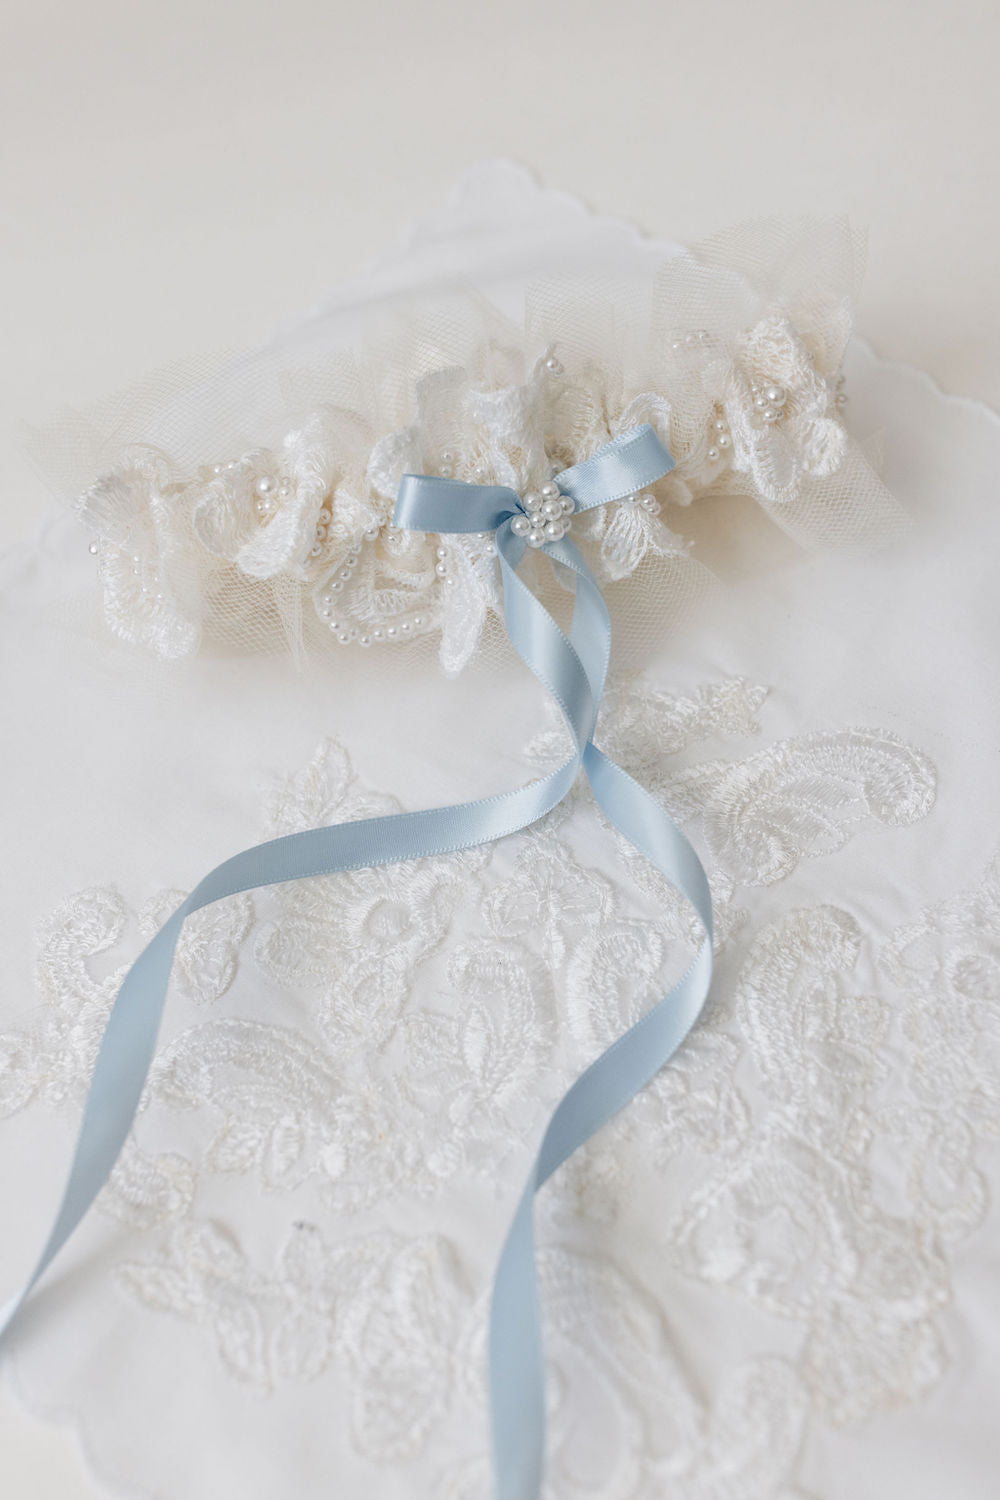 wedding garter and handkerchief heirlooms created from mom's wedding dress handcrafted by The Garter Girl